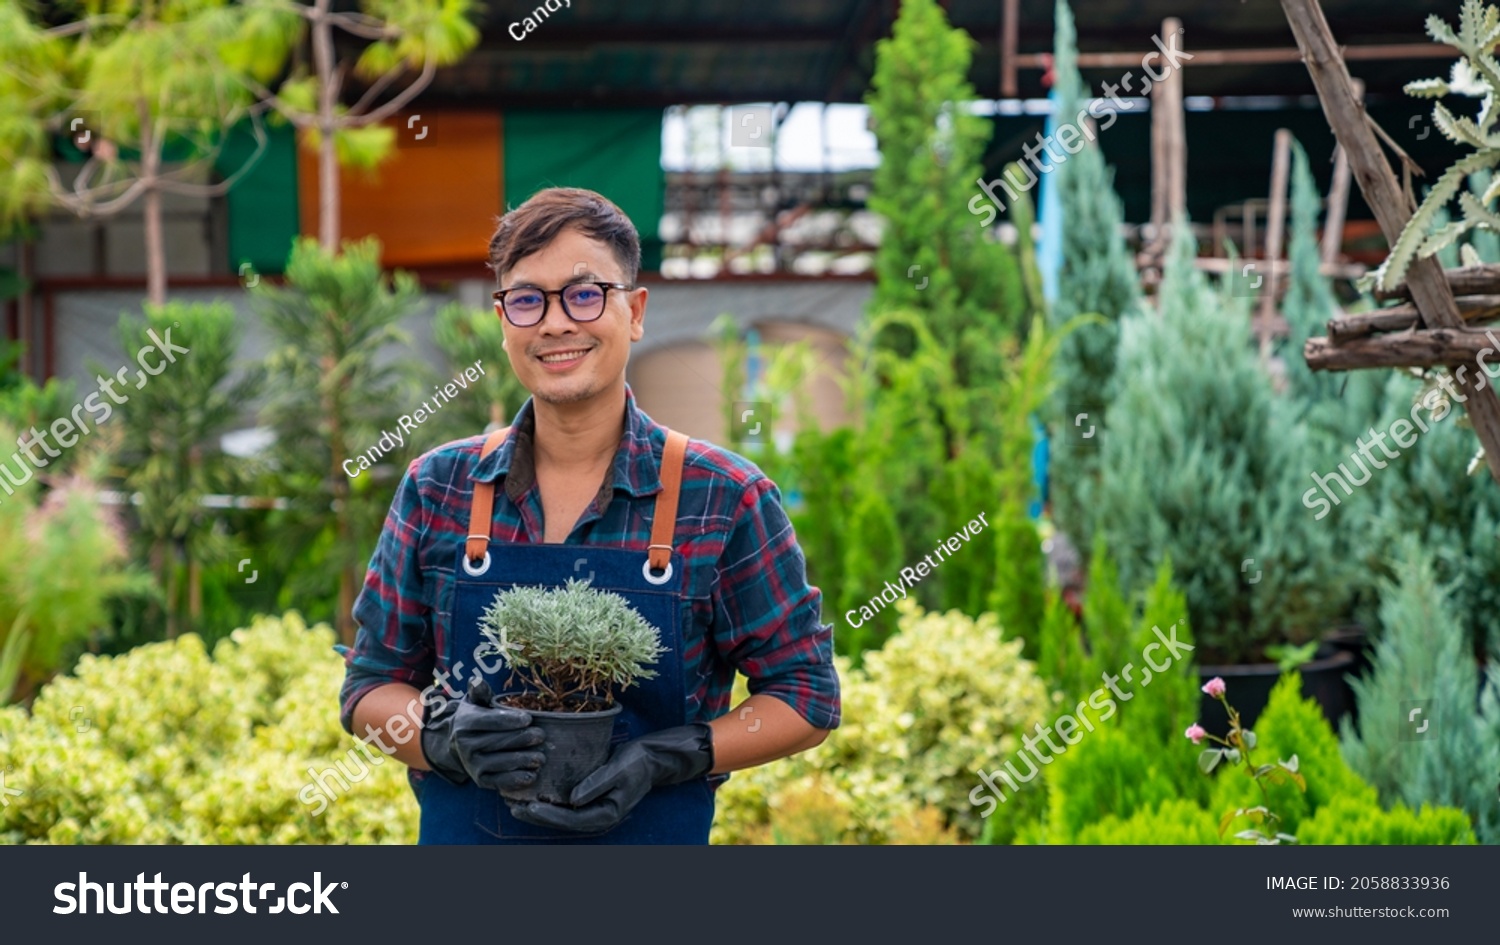 Portrait of Asian man gardener caring potted plants and flowers in greenhouse garden. Male plant shop owner working with houseplants in store. Small business entrepreneur and plant caring concept #2058833936